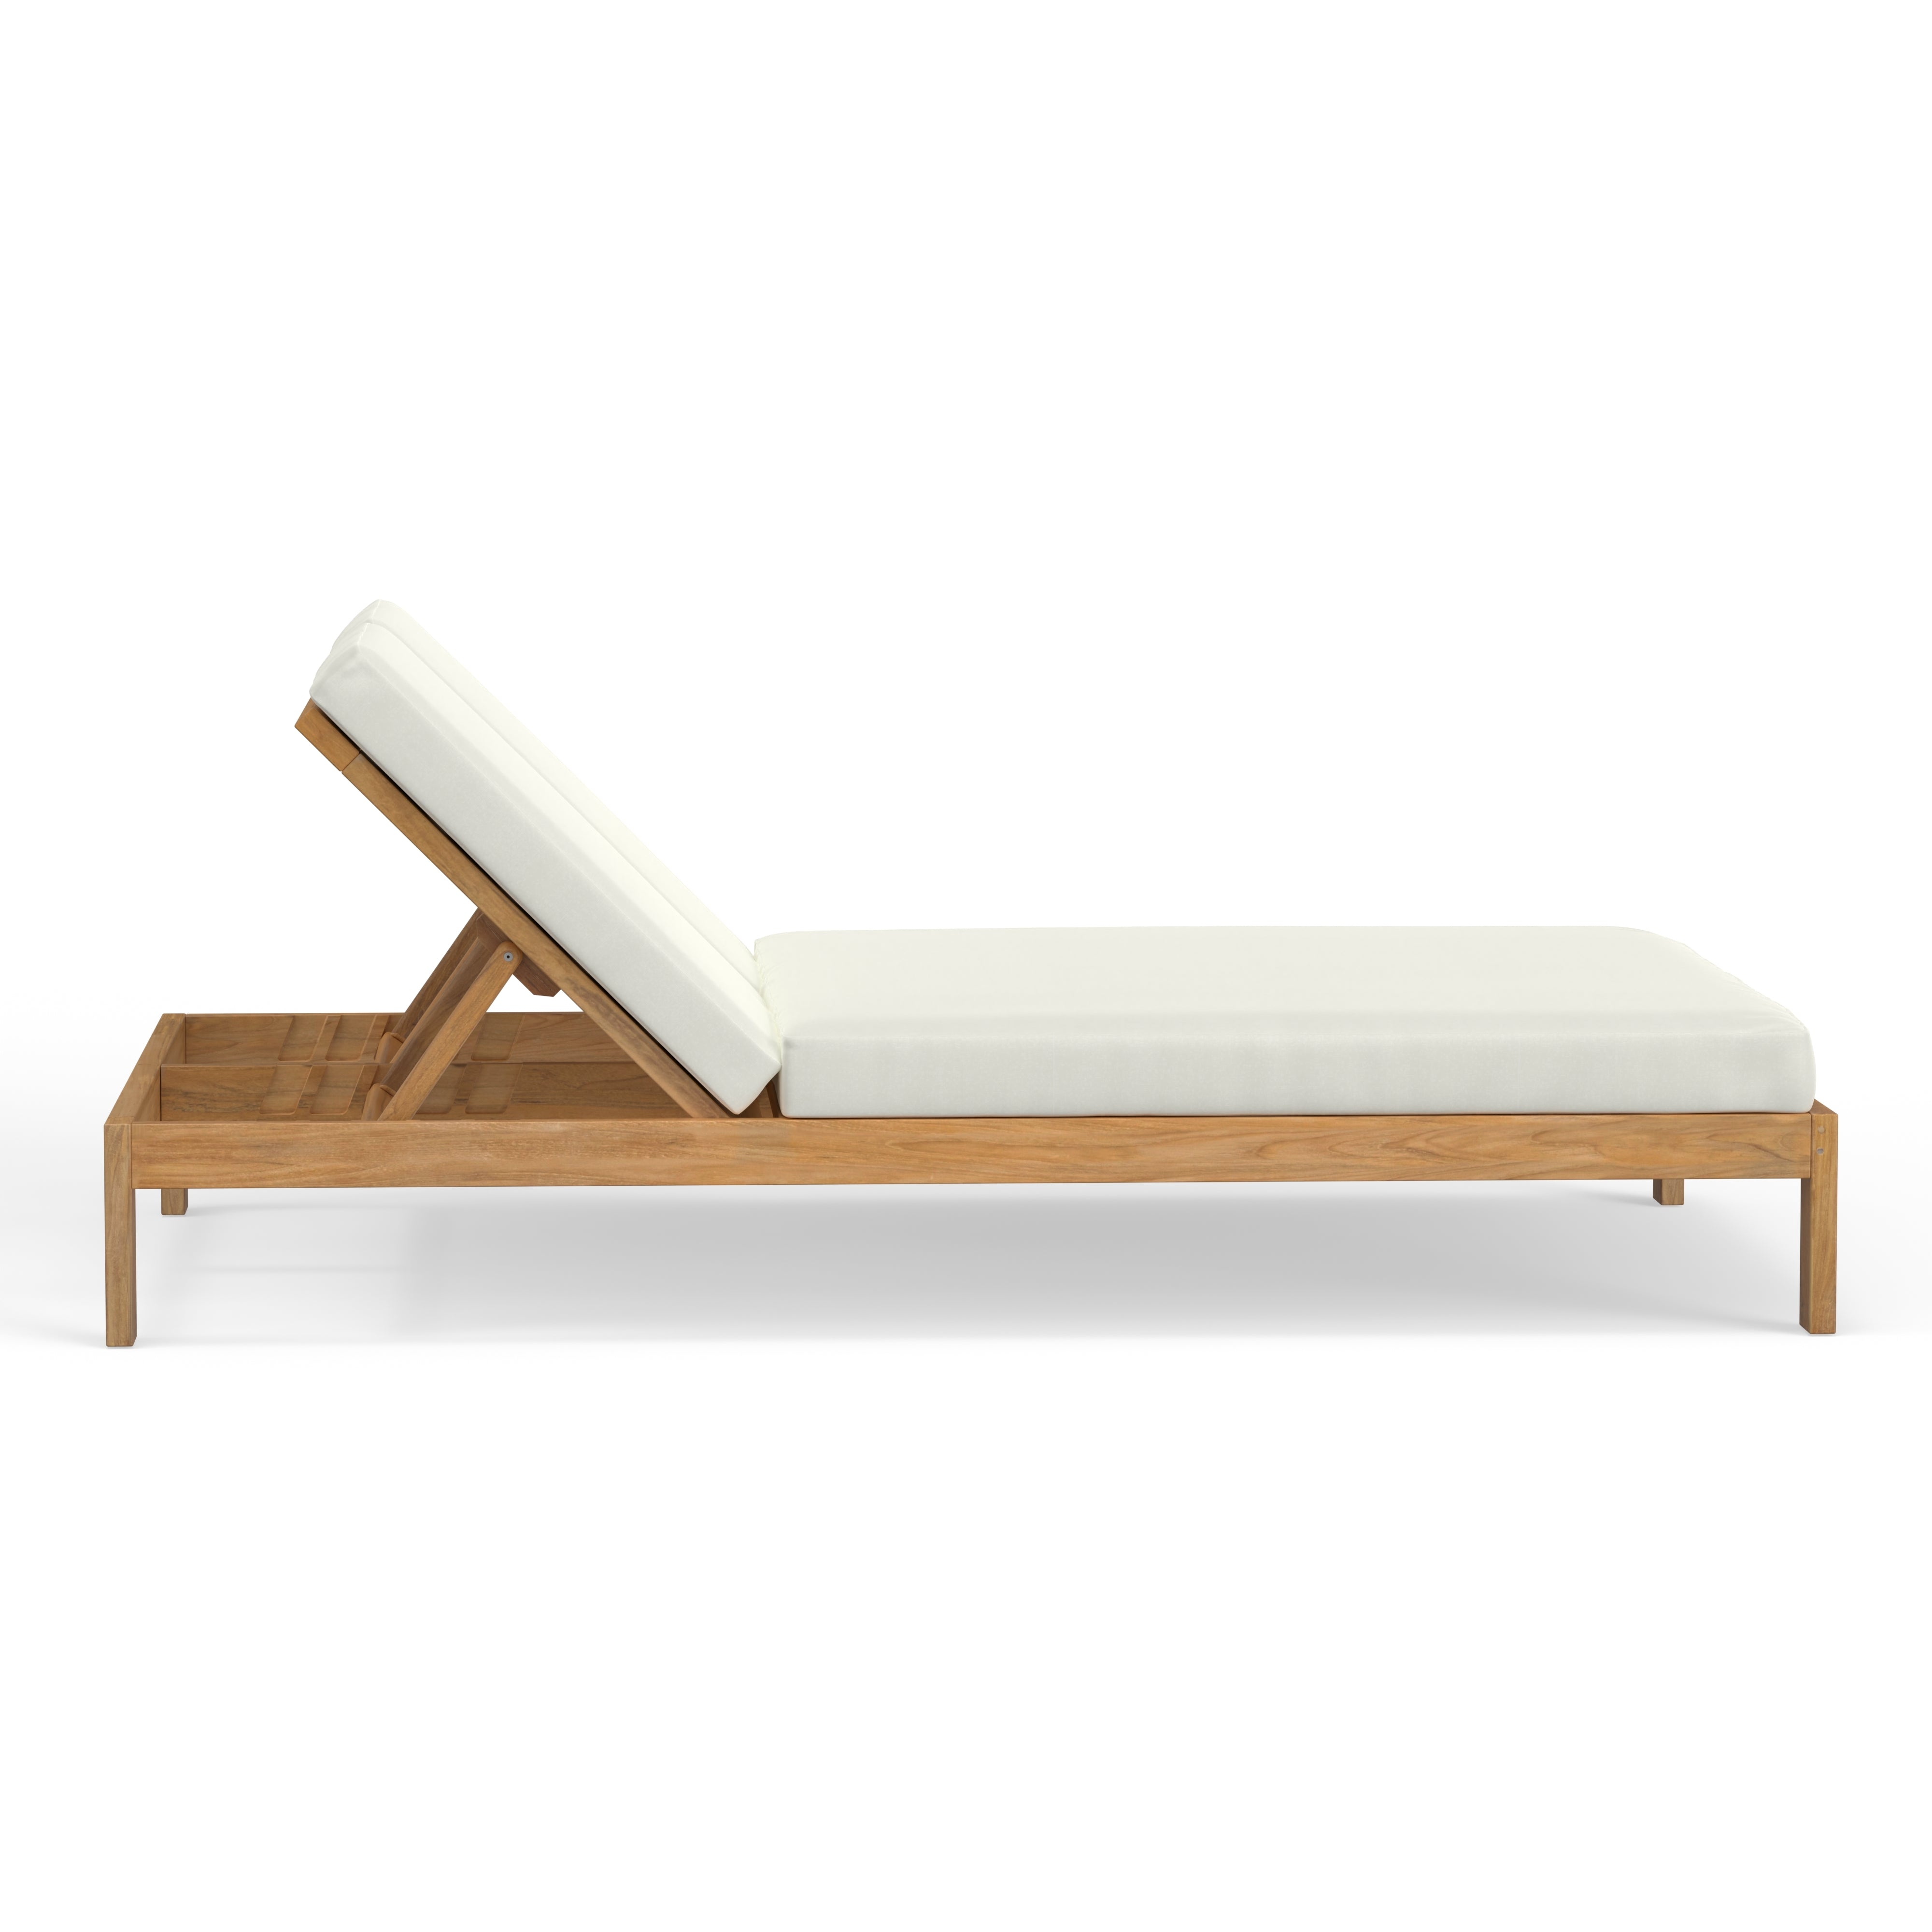 Teak Outdoor Double Lounge Chair, Charleston Harbor Outdoor Double Chaise Lounger